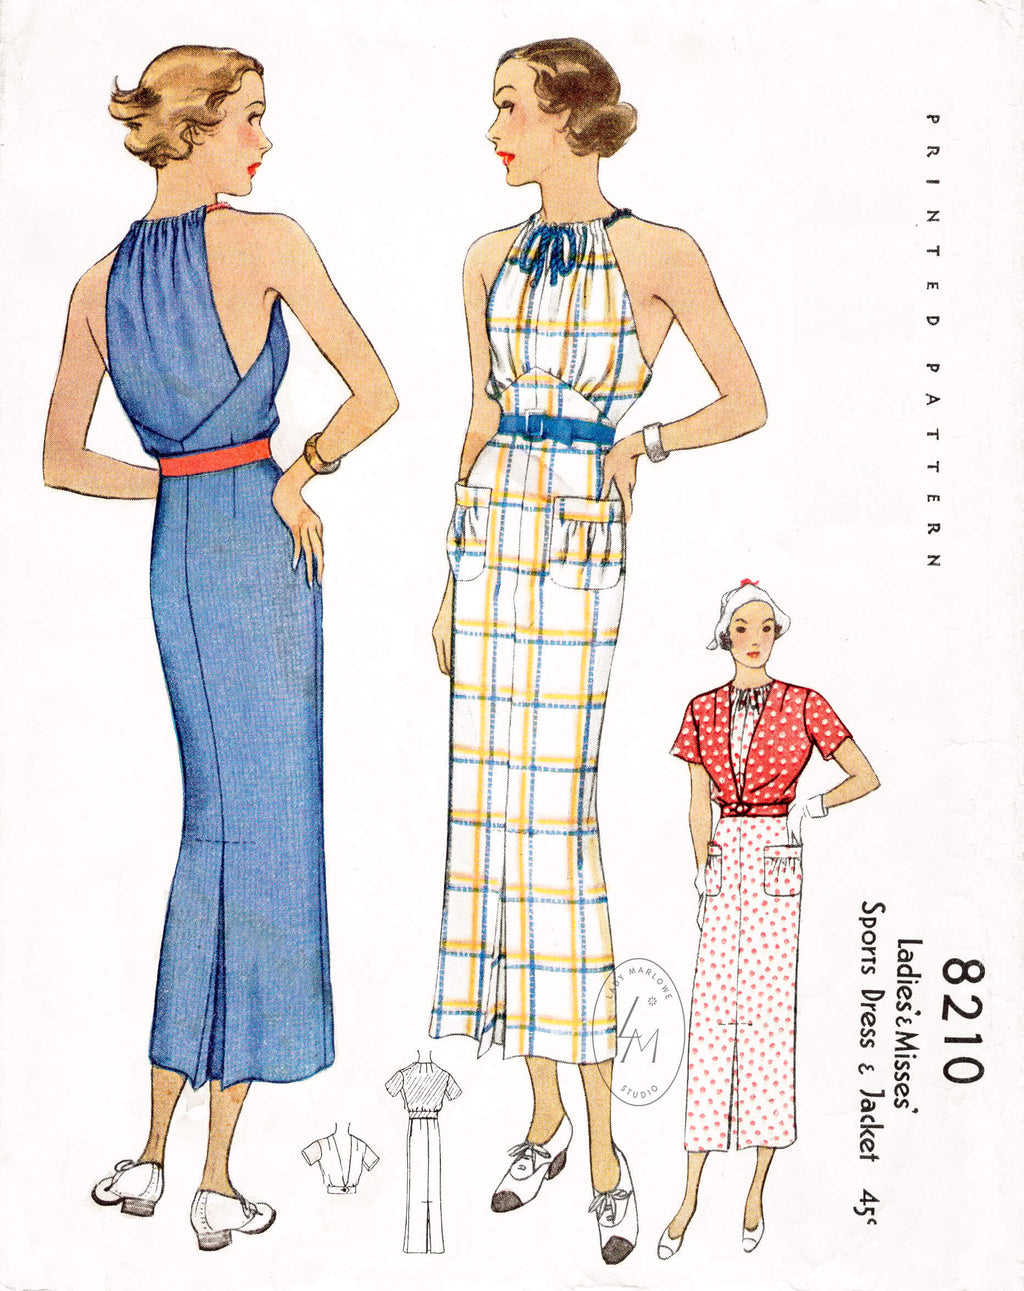 McCall 8210 1930s 1935 sleeveless sports dress and short sleeve jacket 2 piece ensemble vintage sewing pattern reproduction